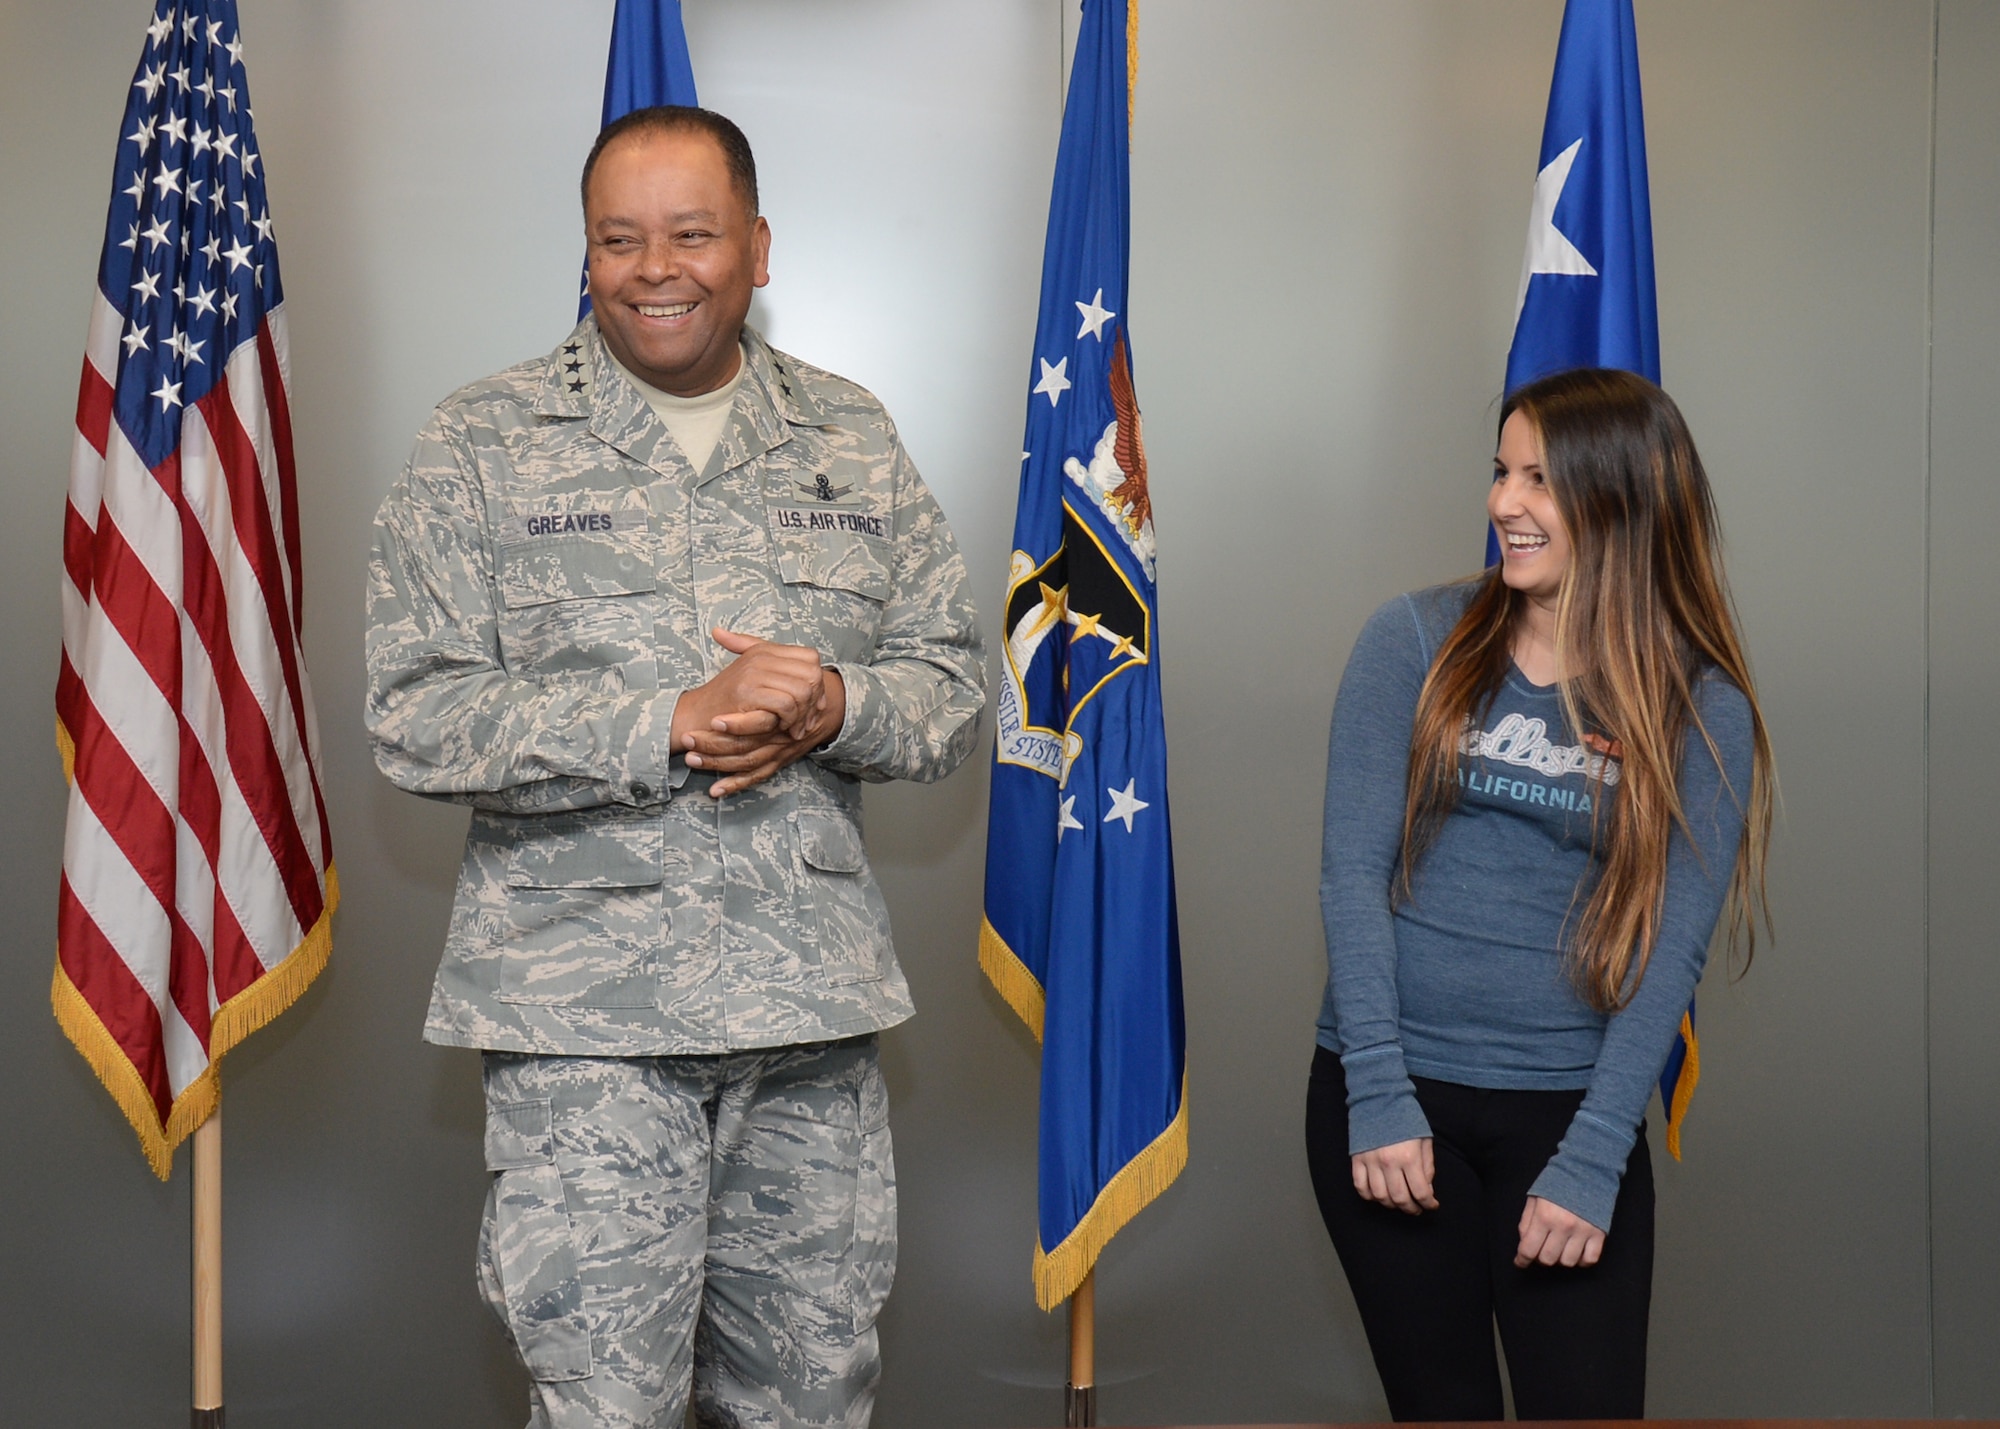 Lt. Gen. Samuel Greaves, Space and Missile Systems Center commander and Air Force program executive officer for space, shares a light moment with Air Force Reserve recruit Jennie Ines prior to beginning an impromptu oath of enlistment ceremony, Jan. 21, 2016. The event transpired as the result of a chance meeting the previous December by the Exchange at Los Angeles Air Force Base in El Segundo, Calif. (U.S. Air Force photo/Van Ha)